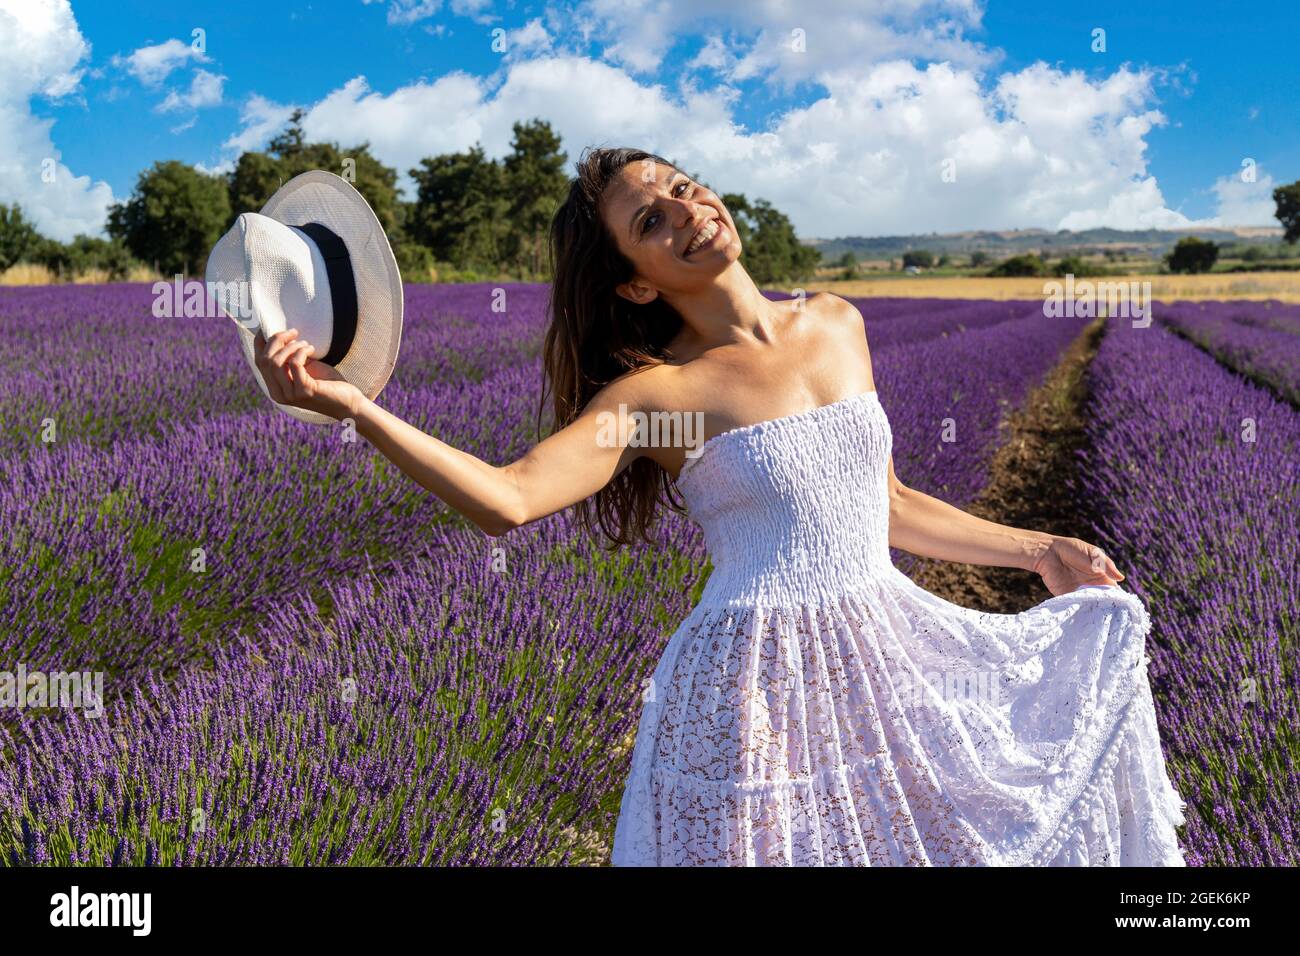 Portrait of a happy young woman playing with her hat in a blooming lavender field. Her white dress stands out against the purple color of lavender flo Stock Photo